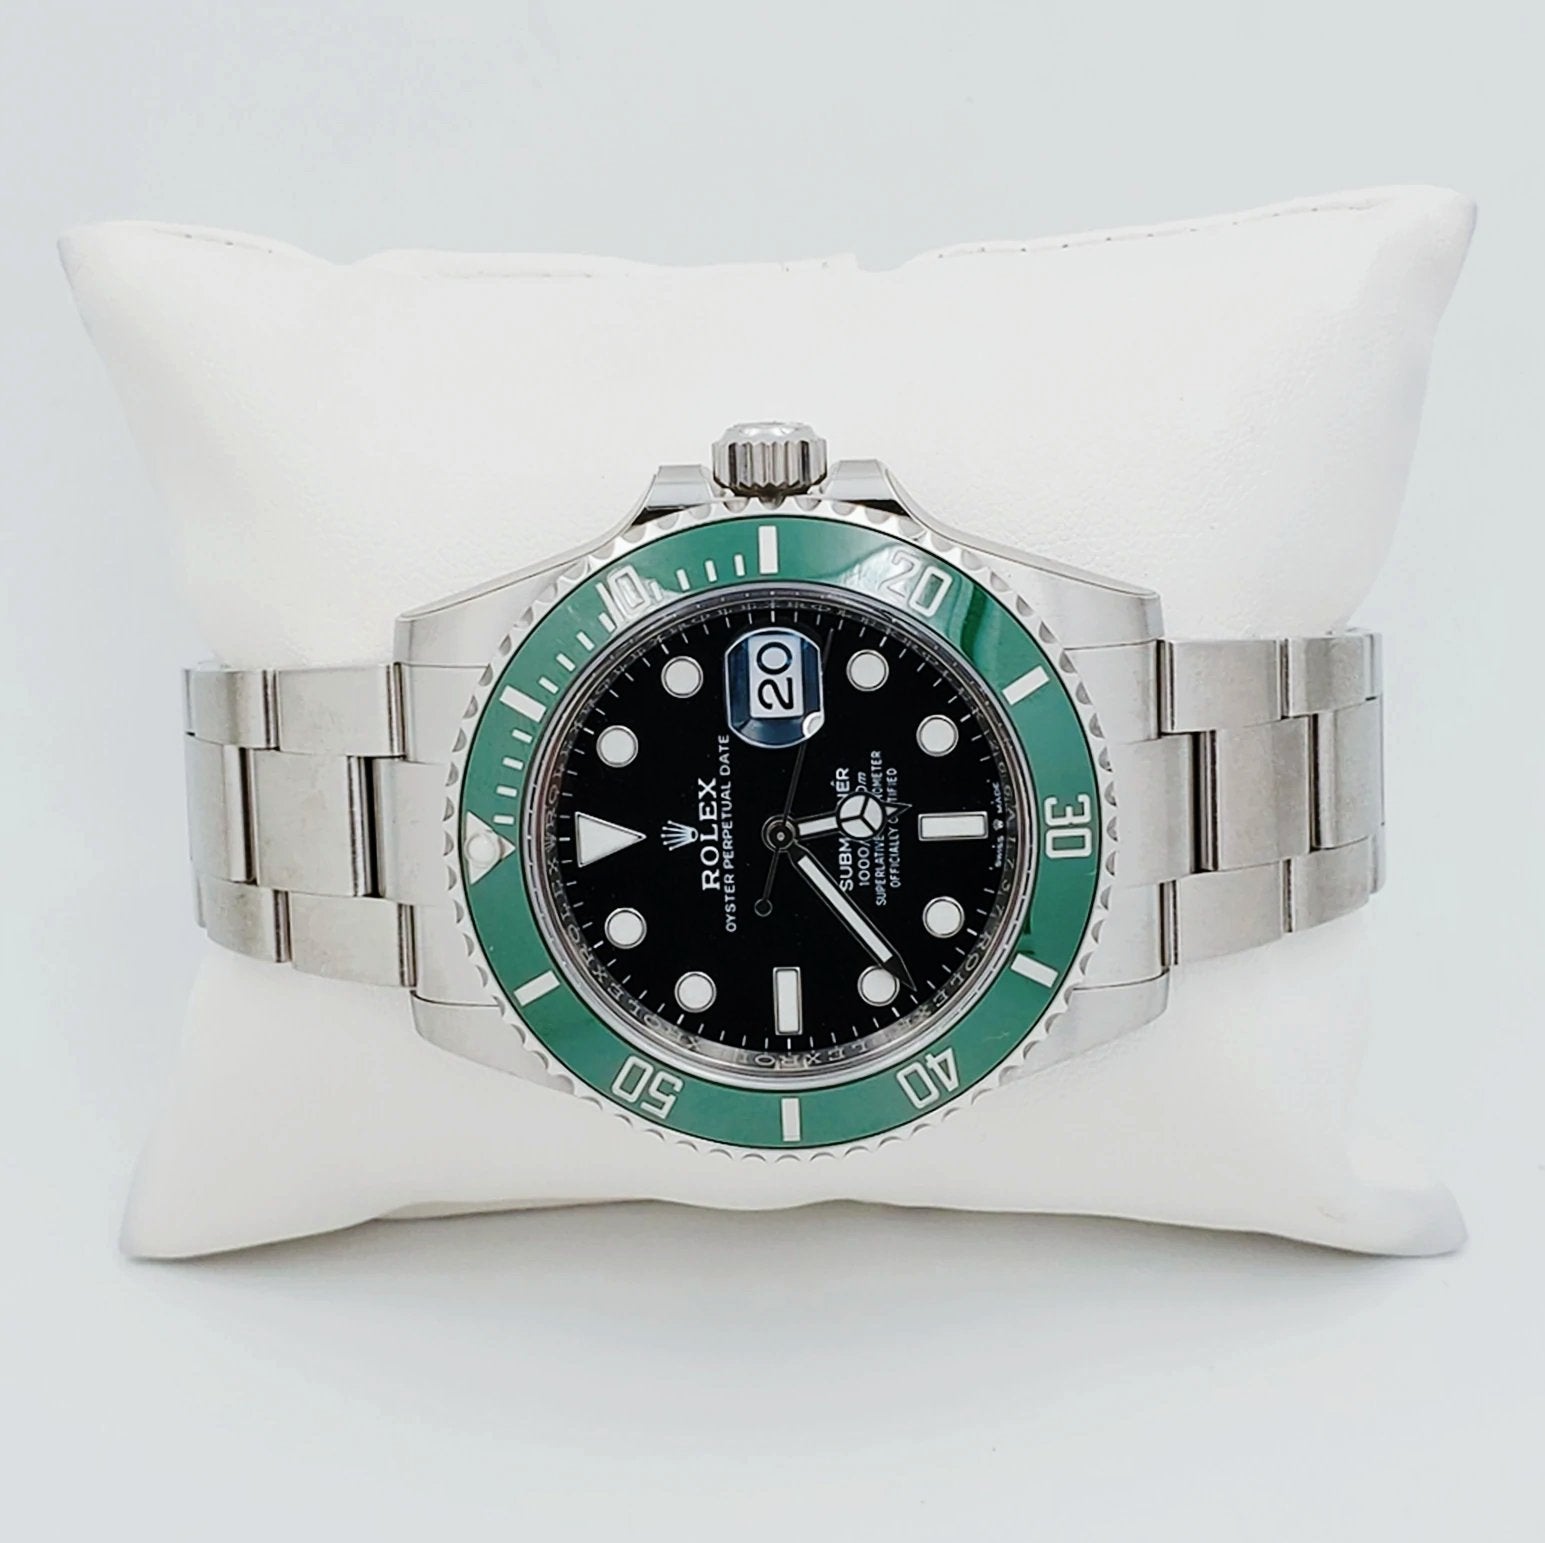 Men's Rolex 41mm Submariner Date Oyster Perpetual Stainless Steel Watch with Black Dial and Green Bezel. (NEW 126610LV)